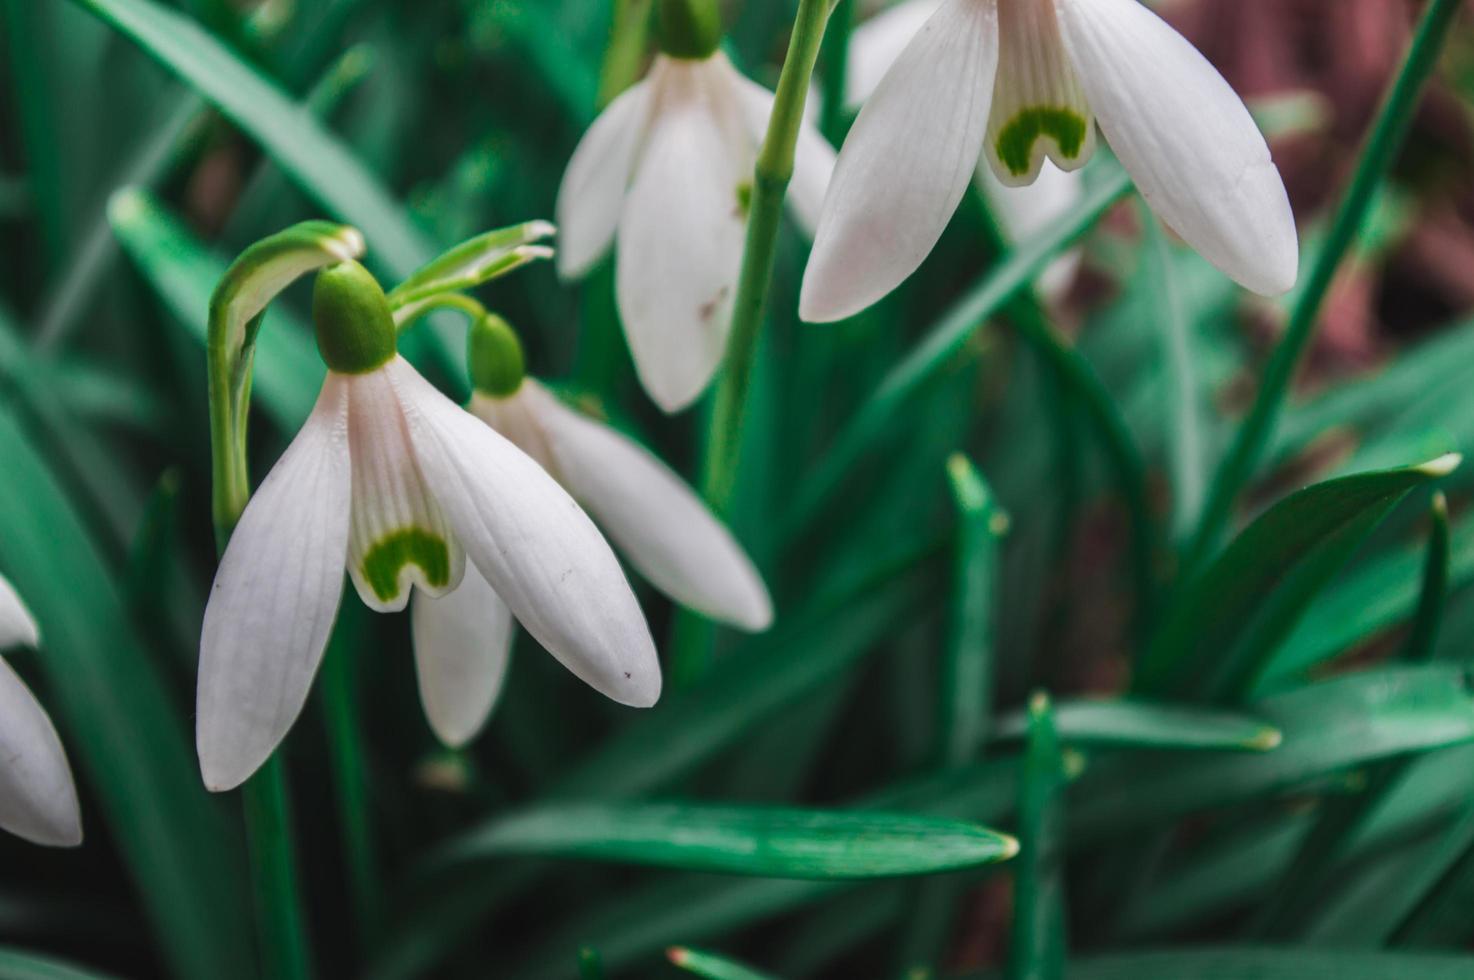 White snowdrops closeup with blurred background photo